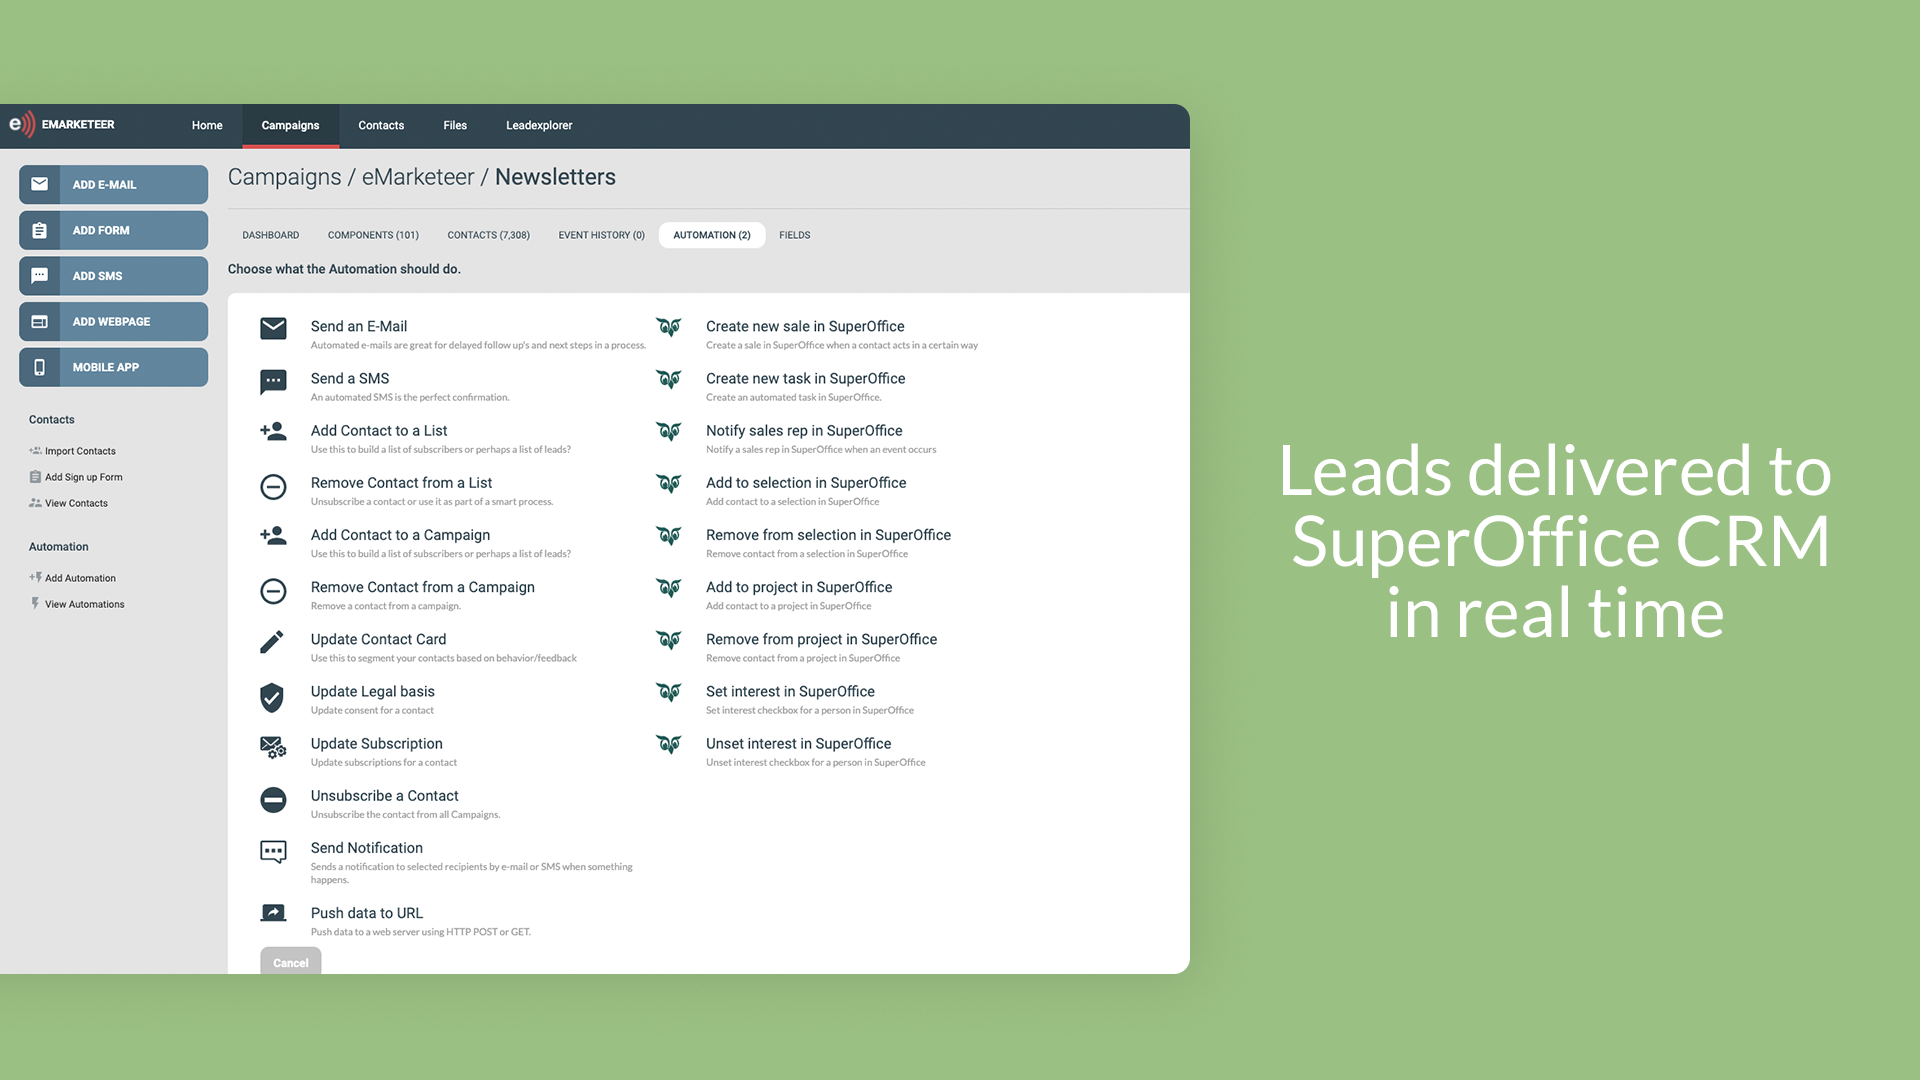 Leads delivered to SuperOffice in real time